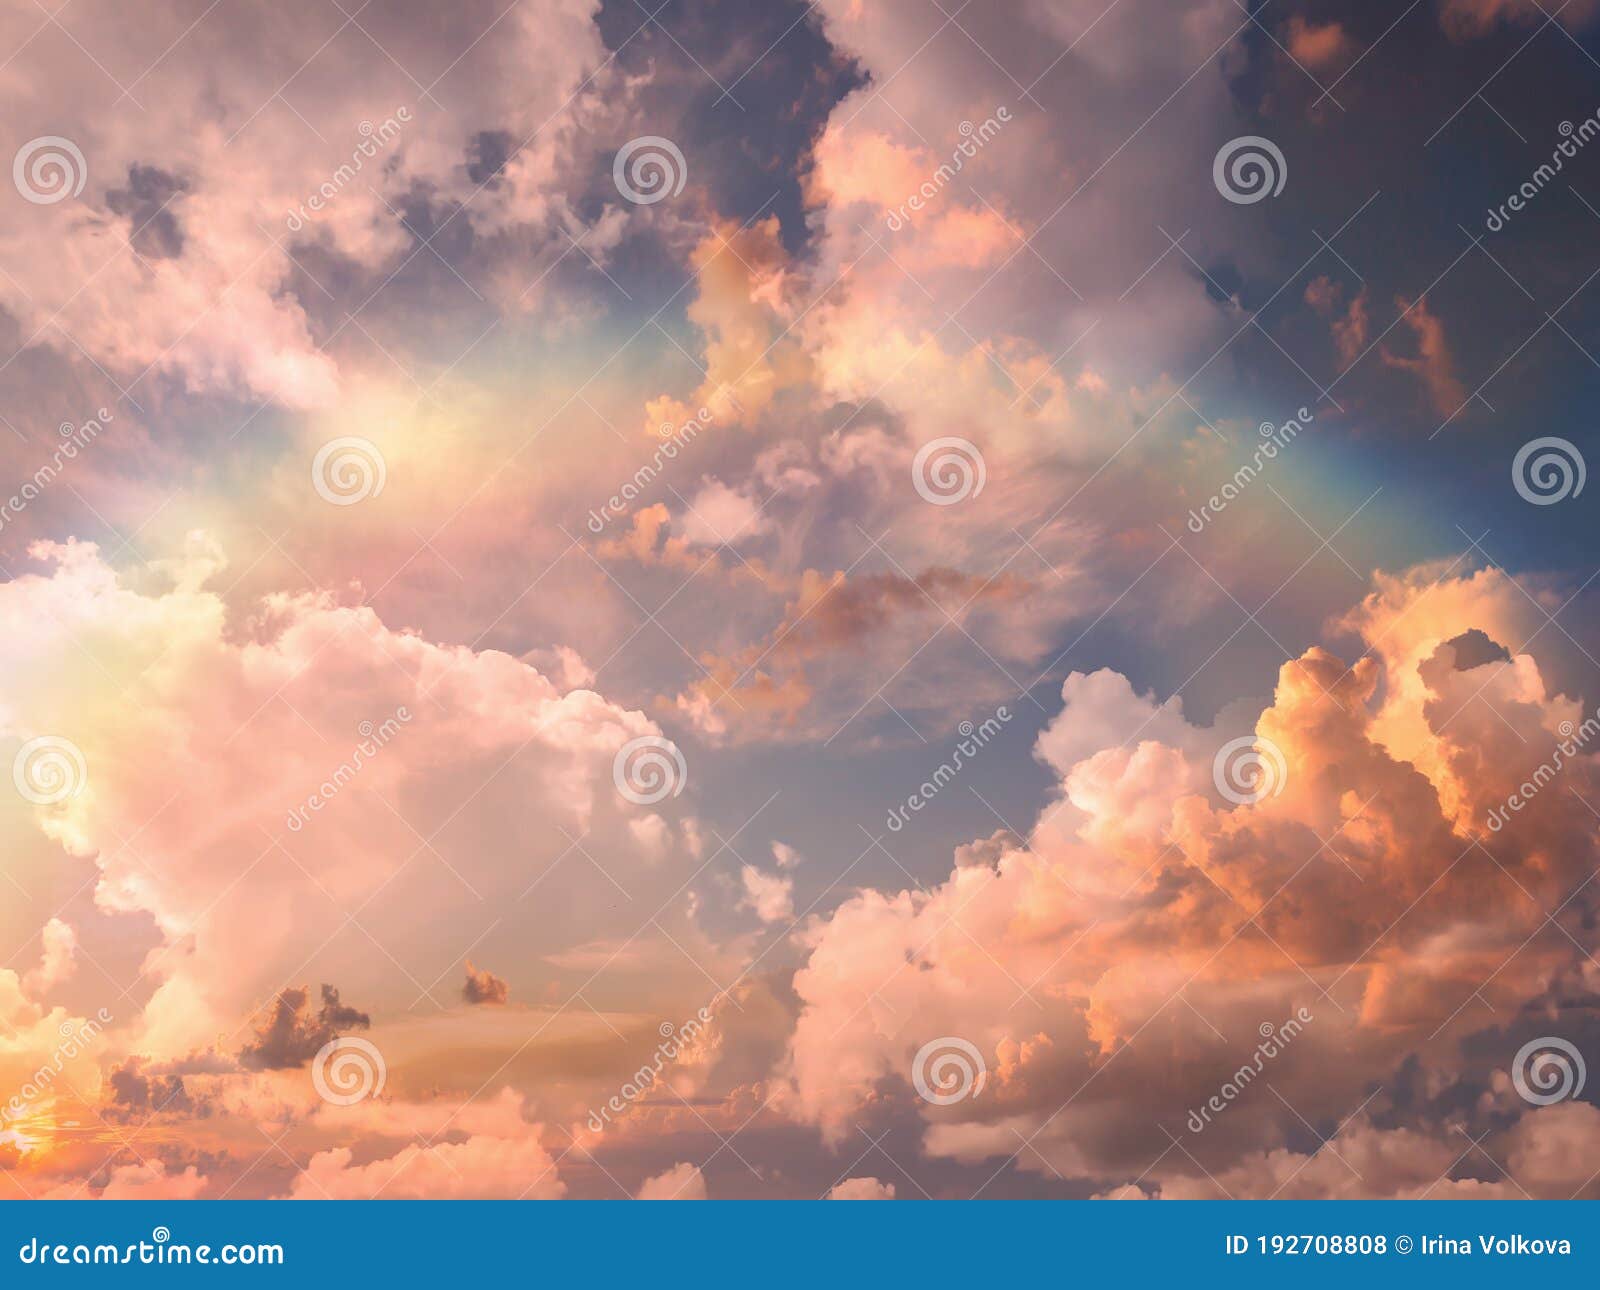 rainbow at blue pink sunset sky fluffy clouds and sunlight beams skyline  nature landscape weather forecast